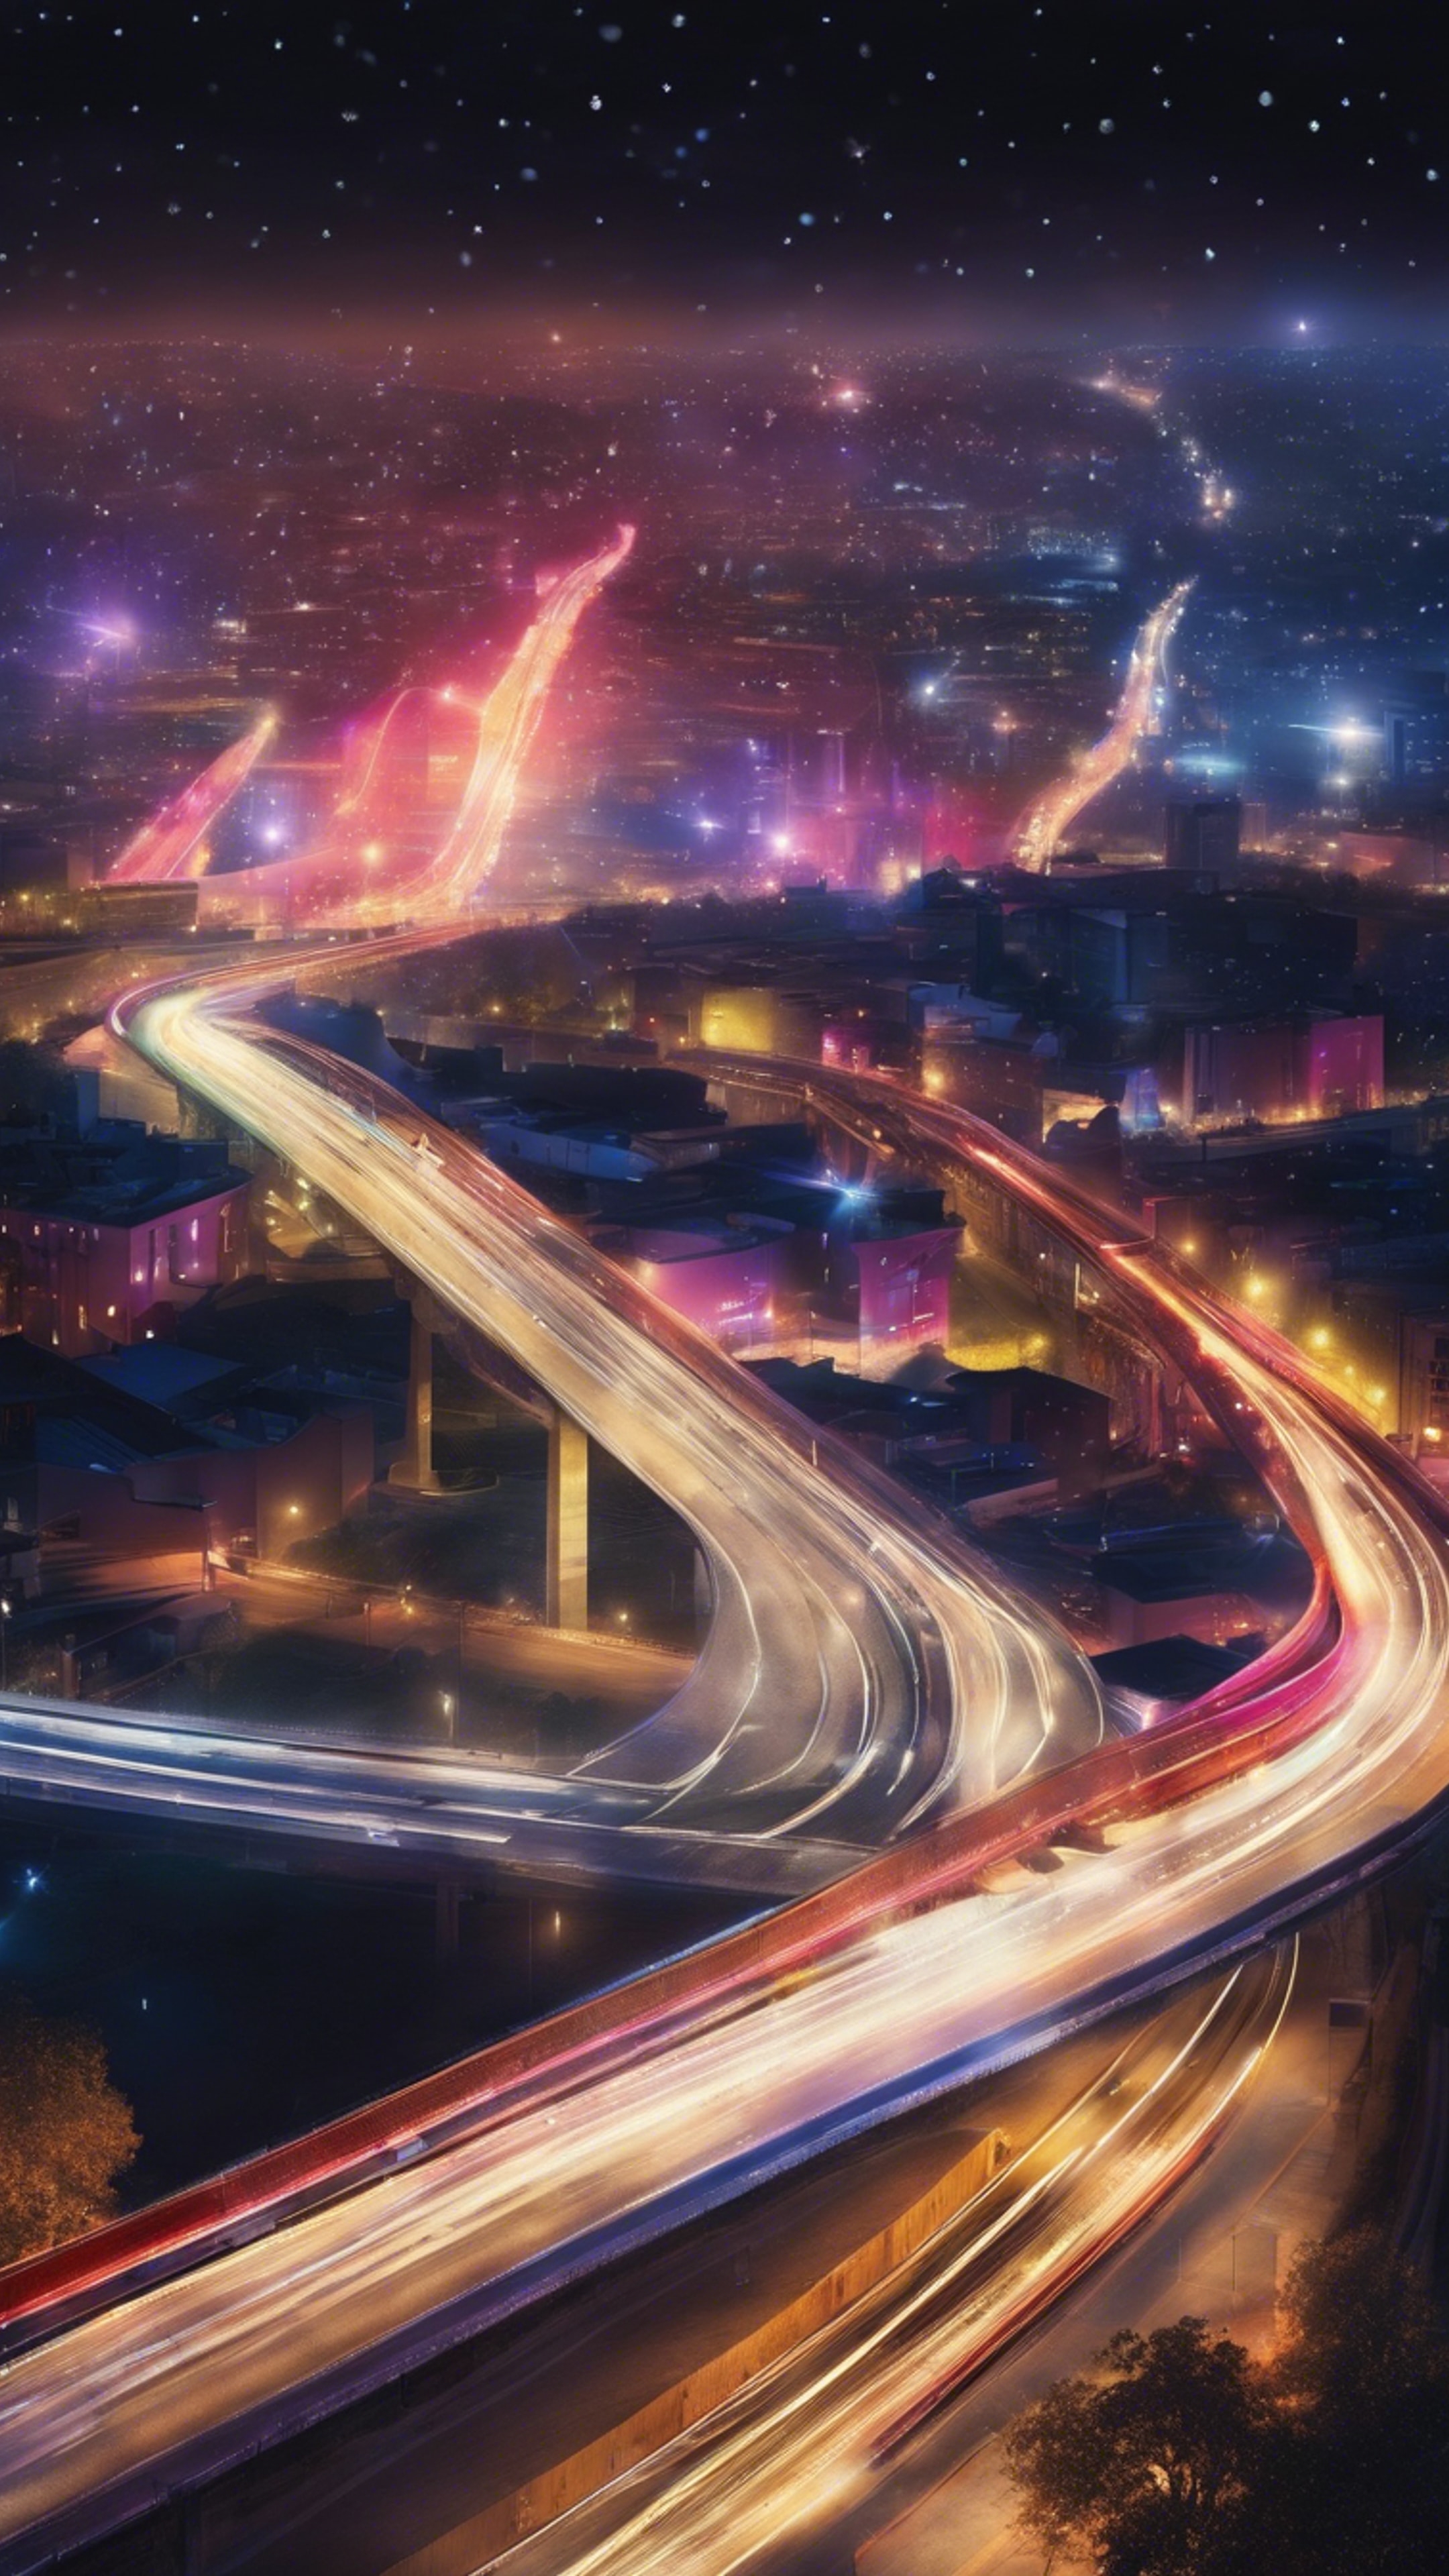 A lustrous highway painting a ribbon of light through the city under the vivid colors of a nocturnal sky. Tapet[7f6125f7f59b411d957d]